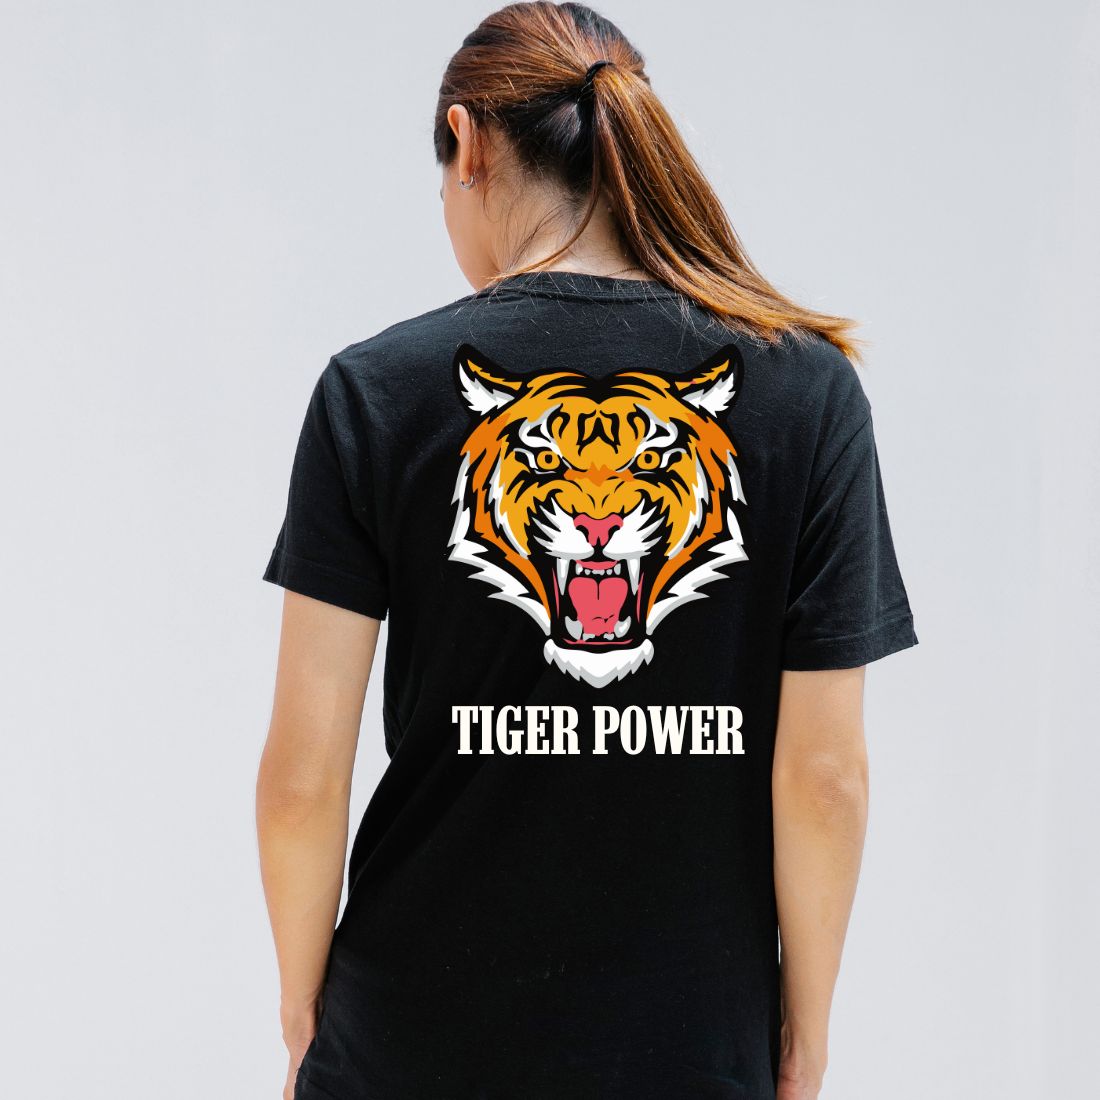 Tiger Power Design preview image.